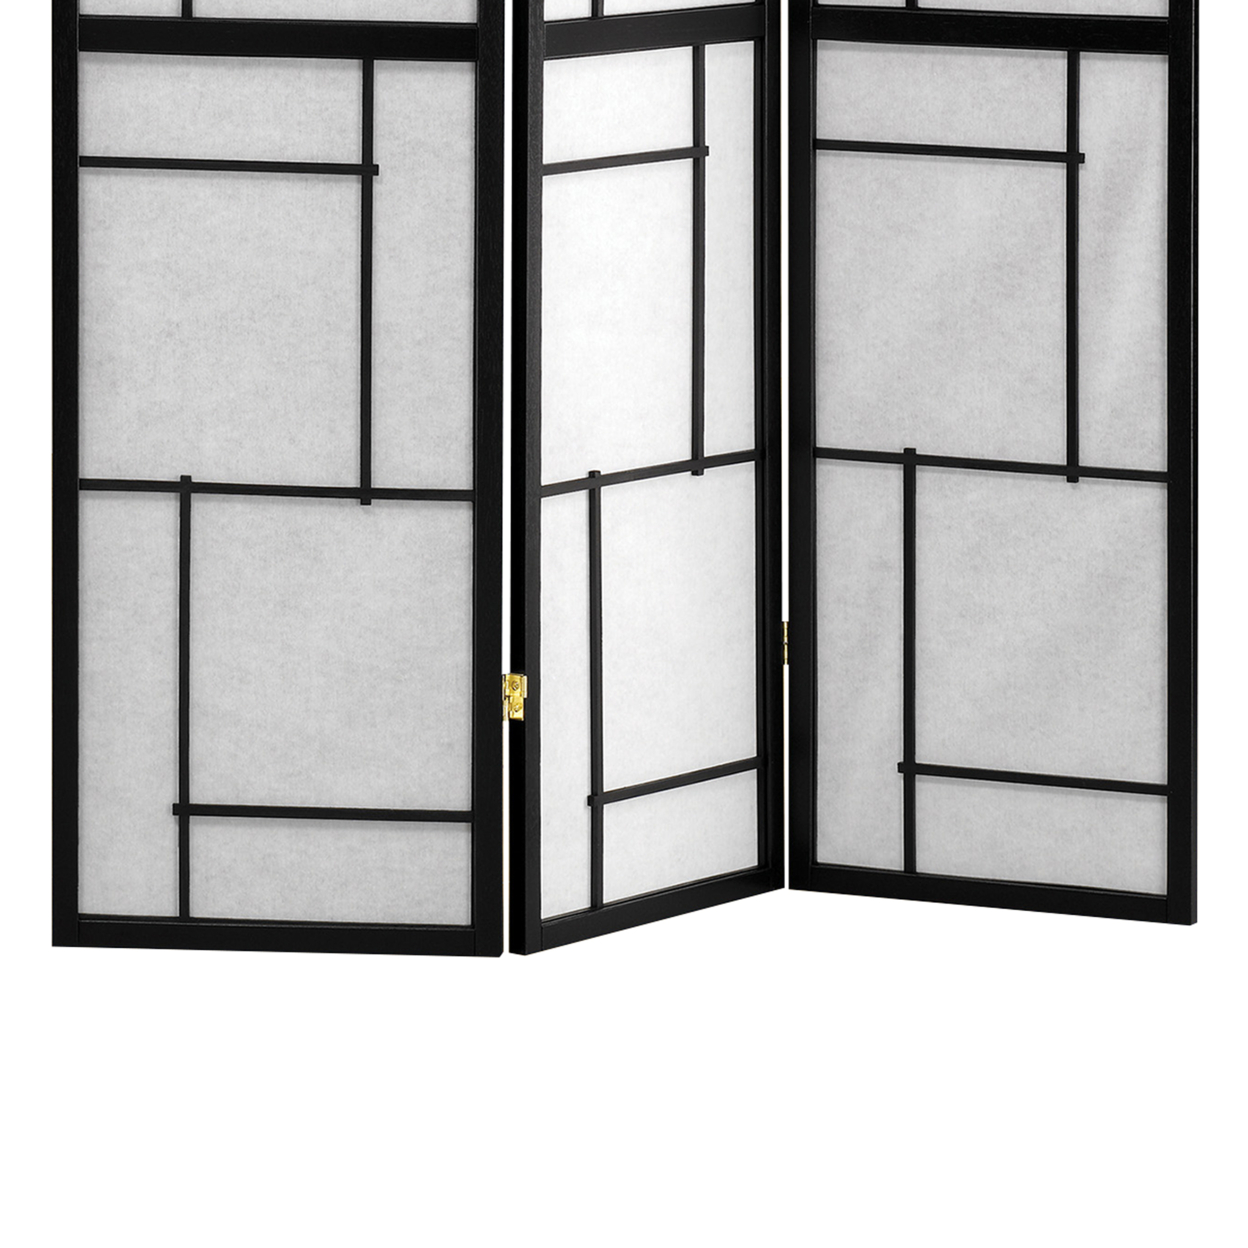 Monarch Specialties Damis 3-Panel Folding Floor Screen Black And White - image 4 of 5